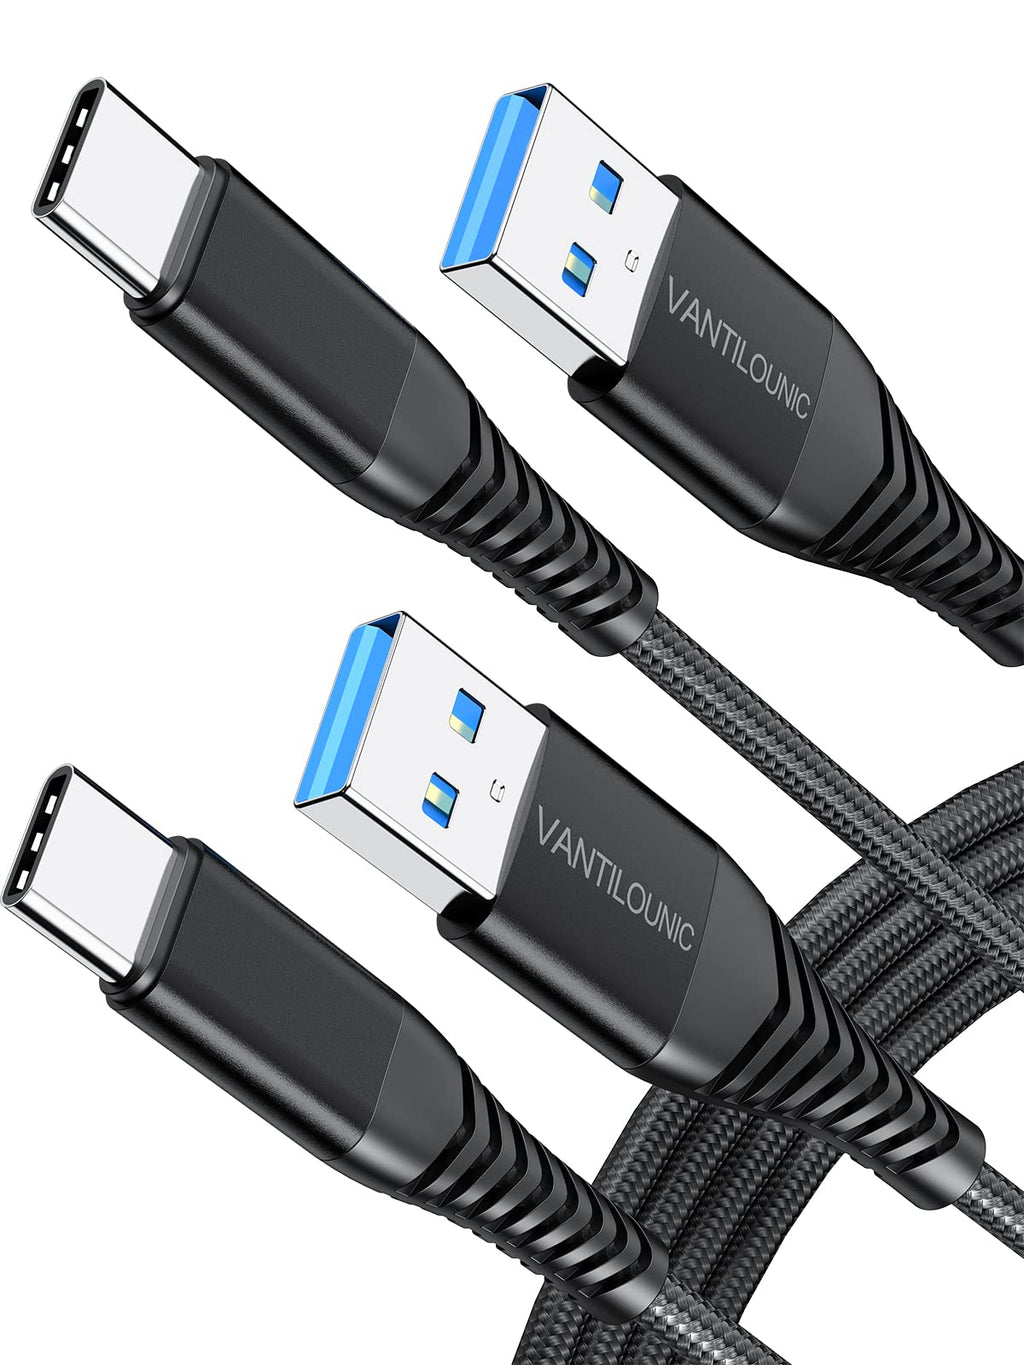 [Australia - AusPower] - [2-Pack 6.6ft] USB Type C Cable 3A Fast Charge, VANTILOUNIC USB A to Type C Charger Cord Braided Compatible with Samsung Galaxy S8 S9 S10 S20 Plus A11 A60, Note 8 910,LG and USB C Charger(Black) 6.6 Feet 